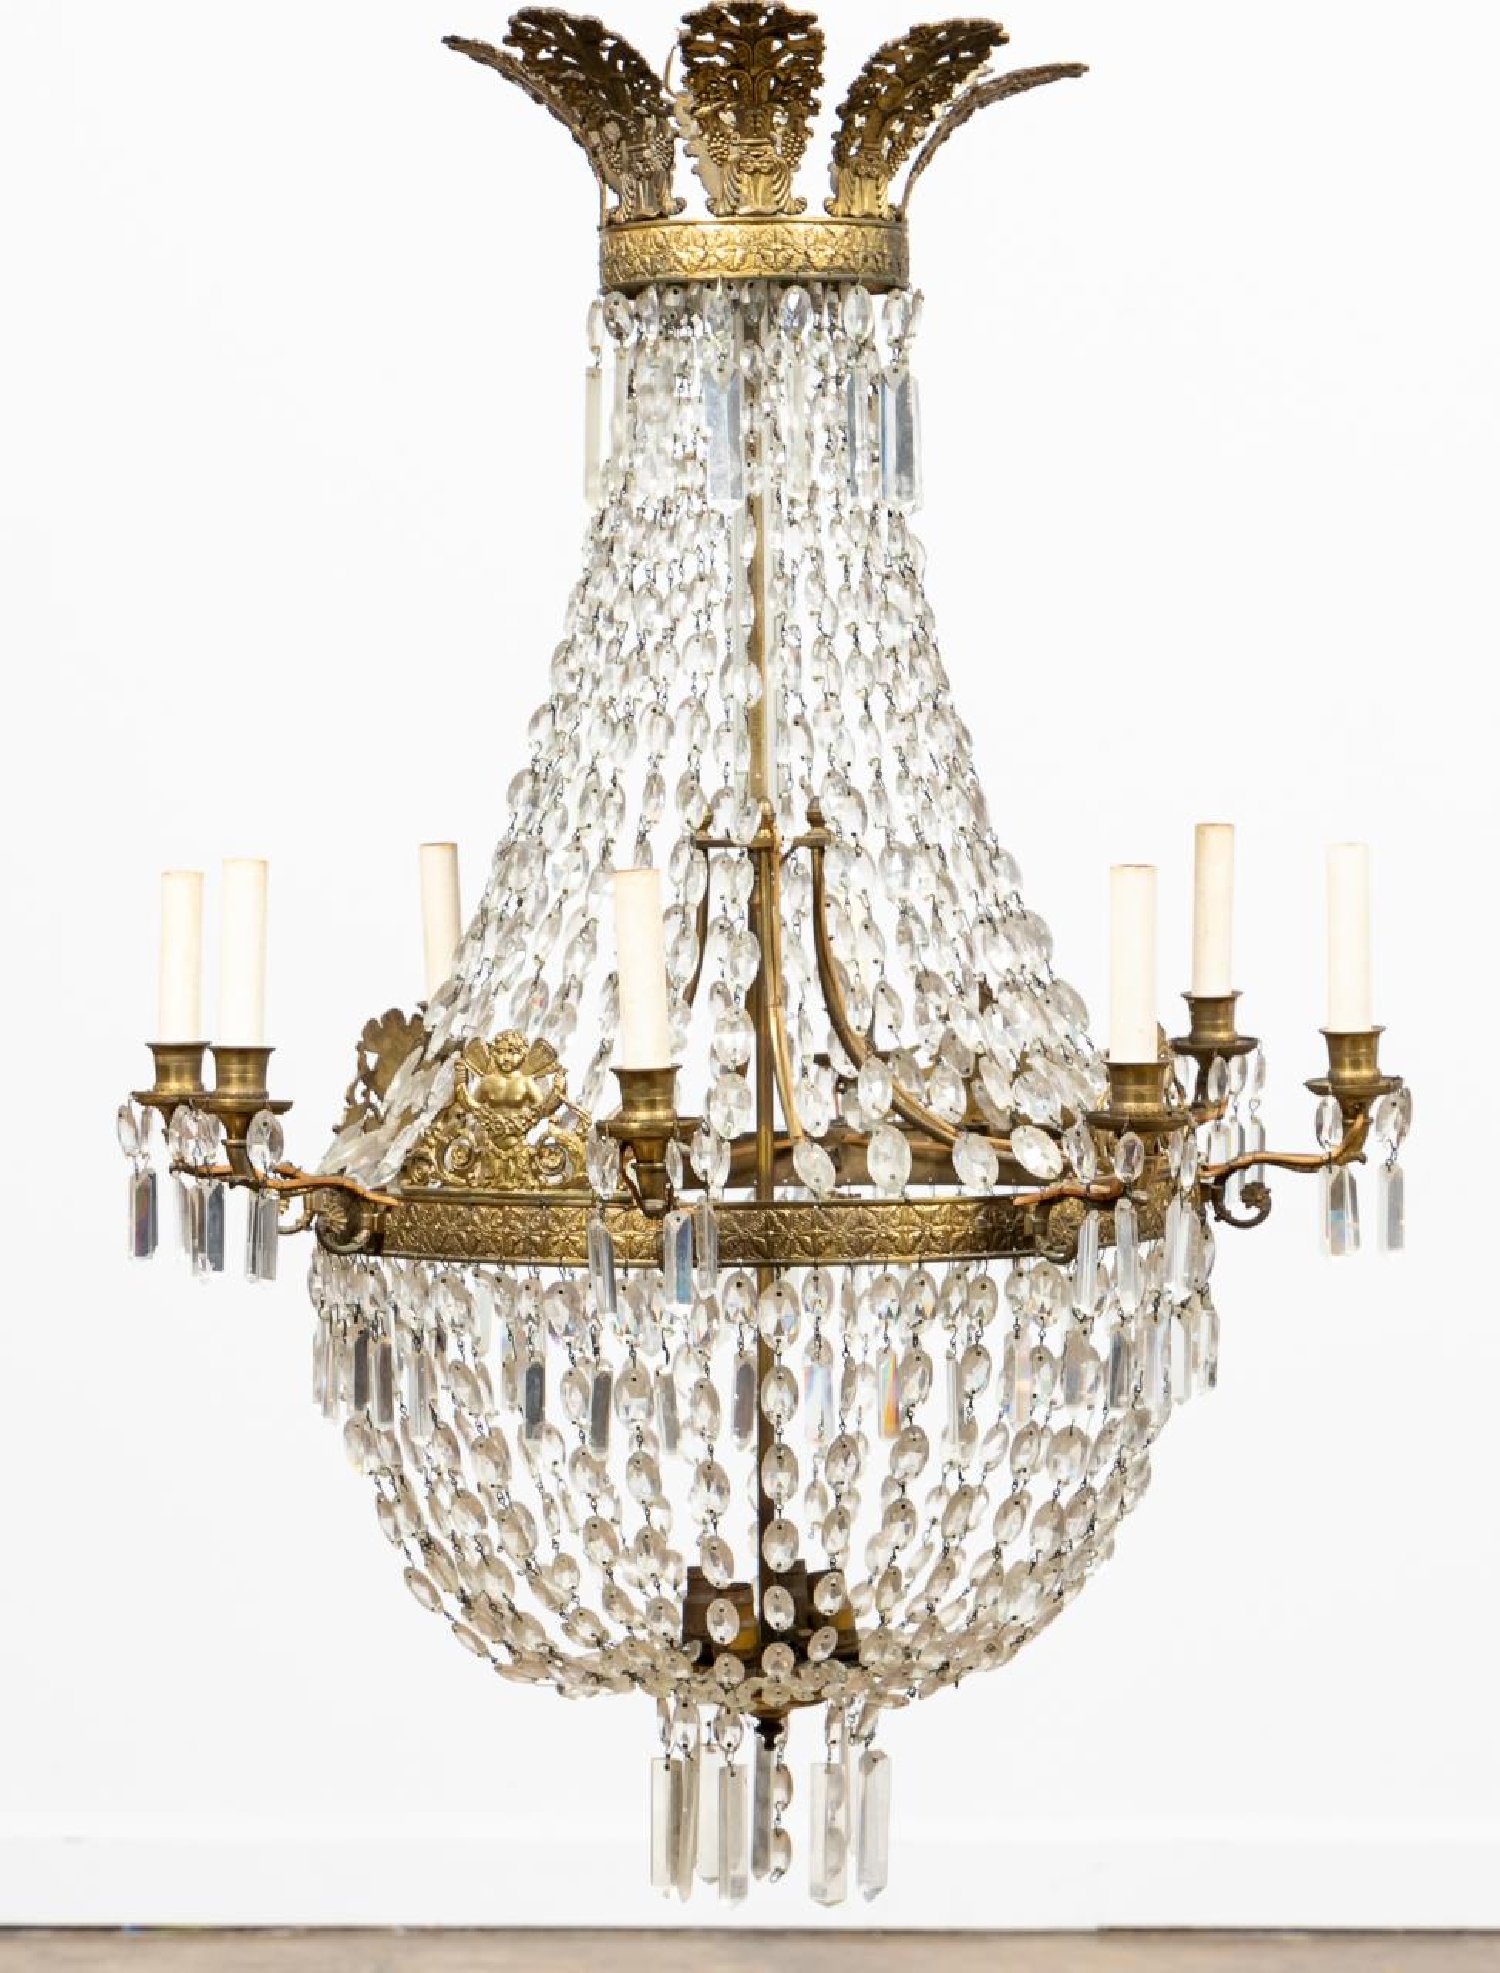 PR. EMPIRE STYLE GILT & CRYSTAL BASKET CHANDELIERS - Image 4 of 7